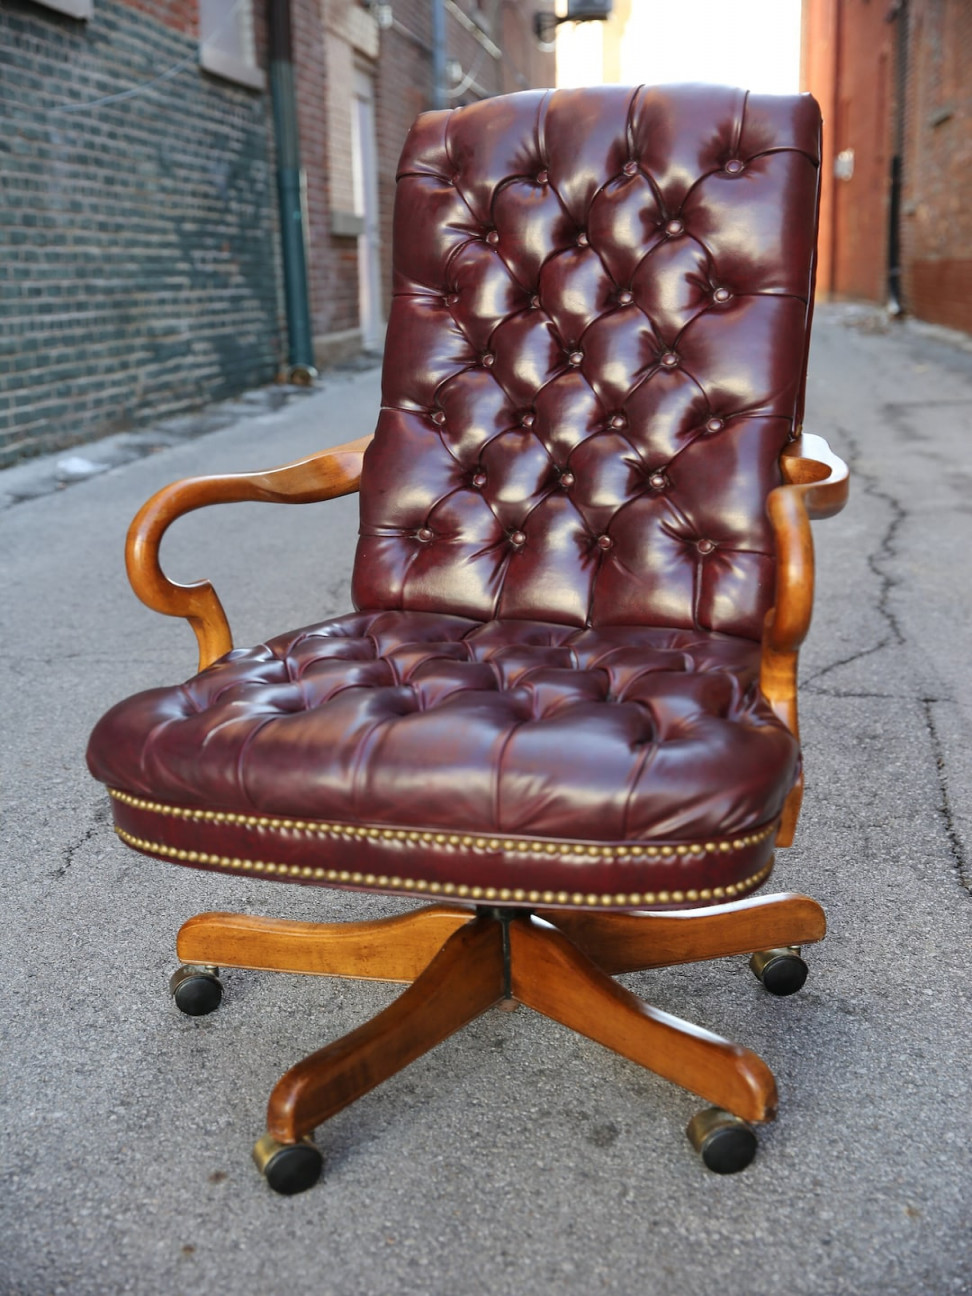 Vintage Leather Office Desk Chair with Swivel Seat Tufted - Etsy